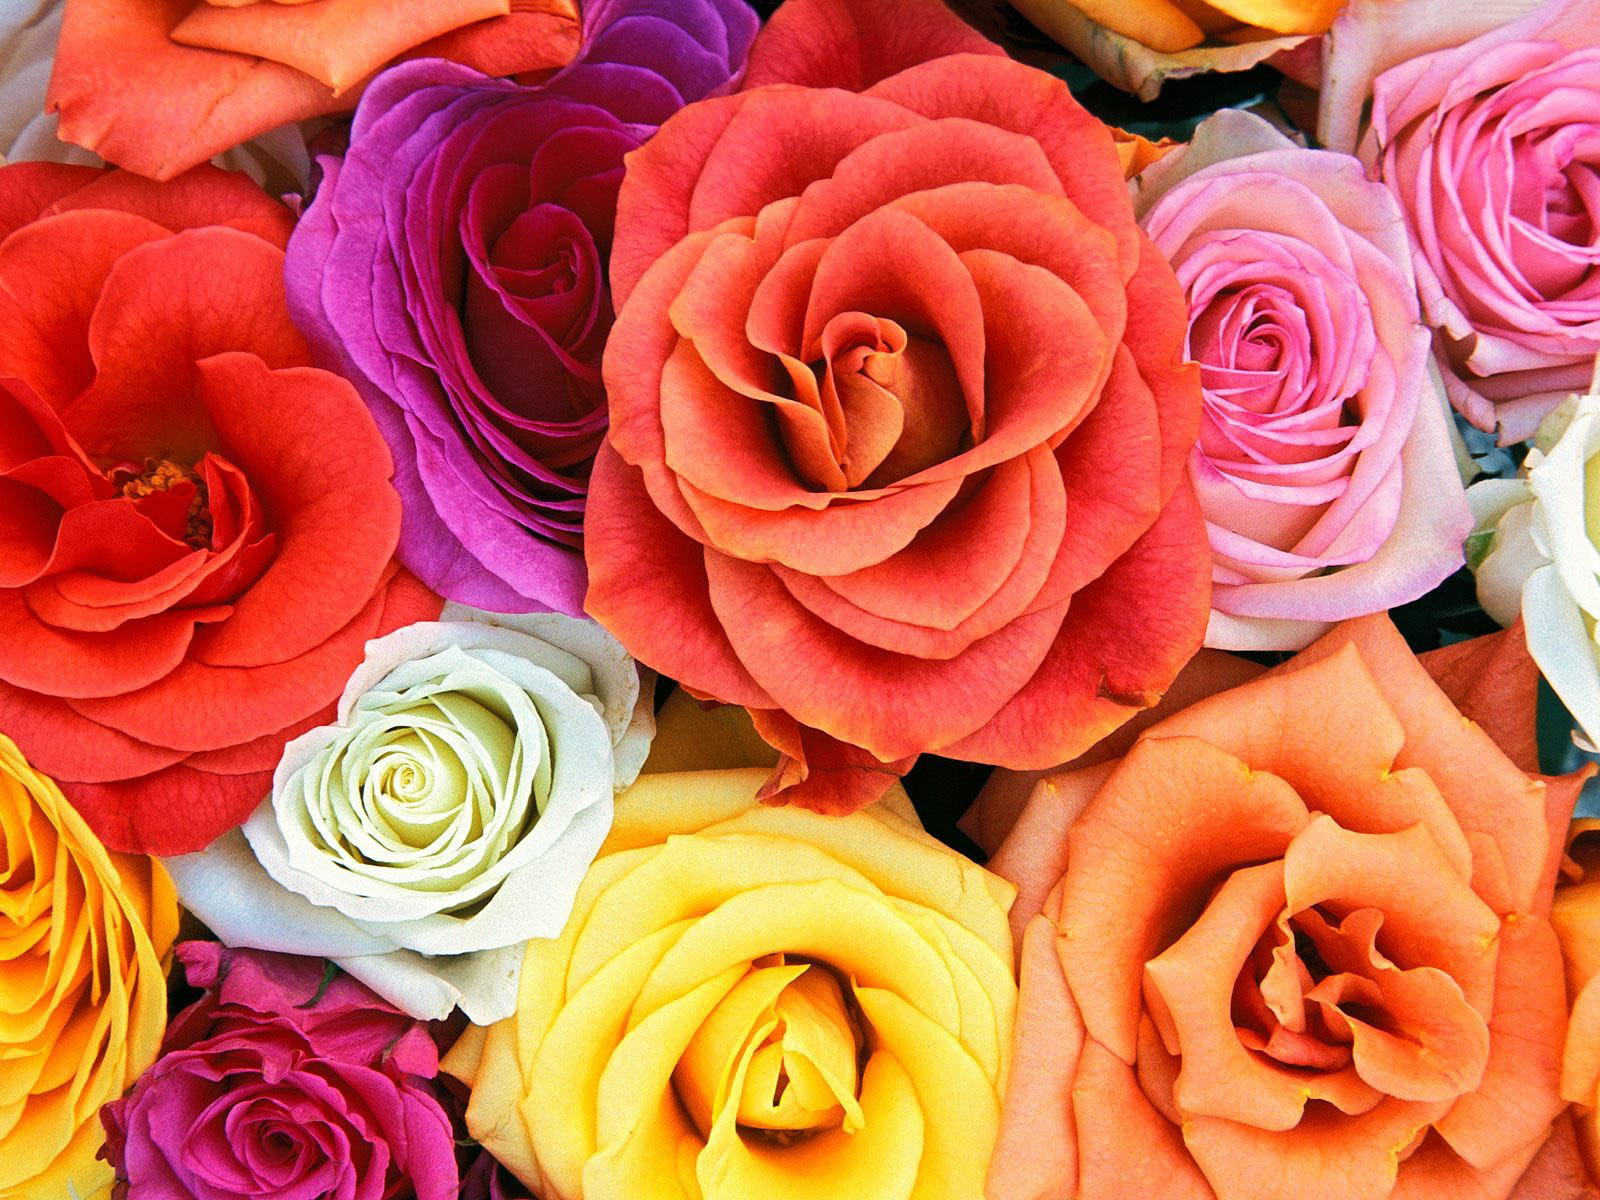 25 Beautiful Flower Wallpapers for your desktop - Flower Pictures